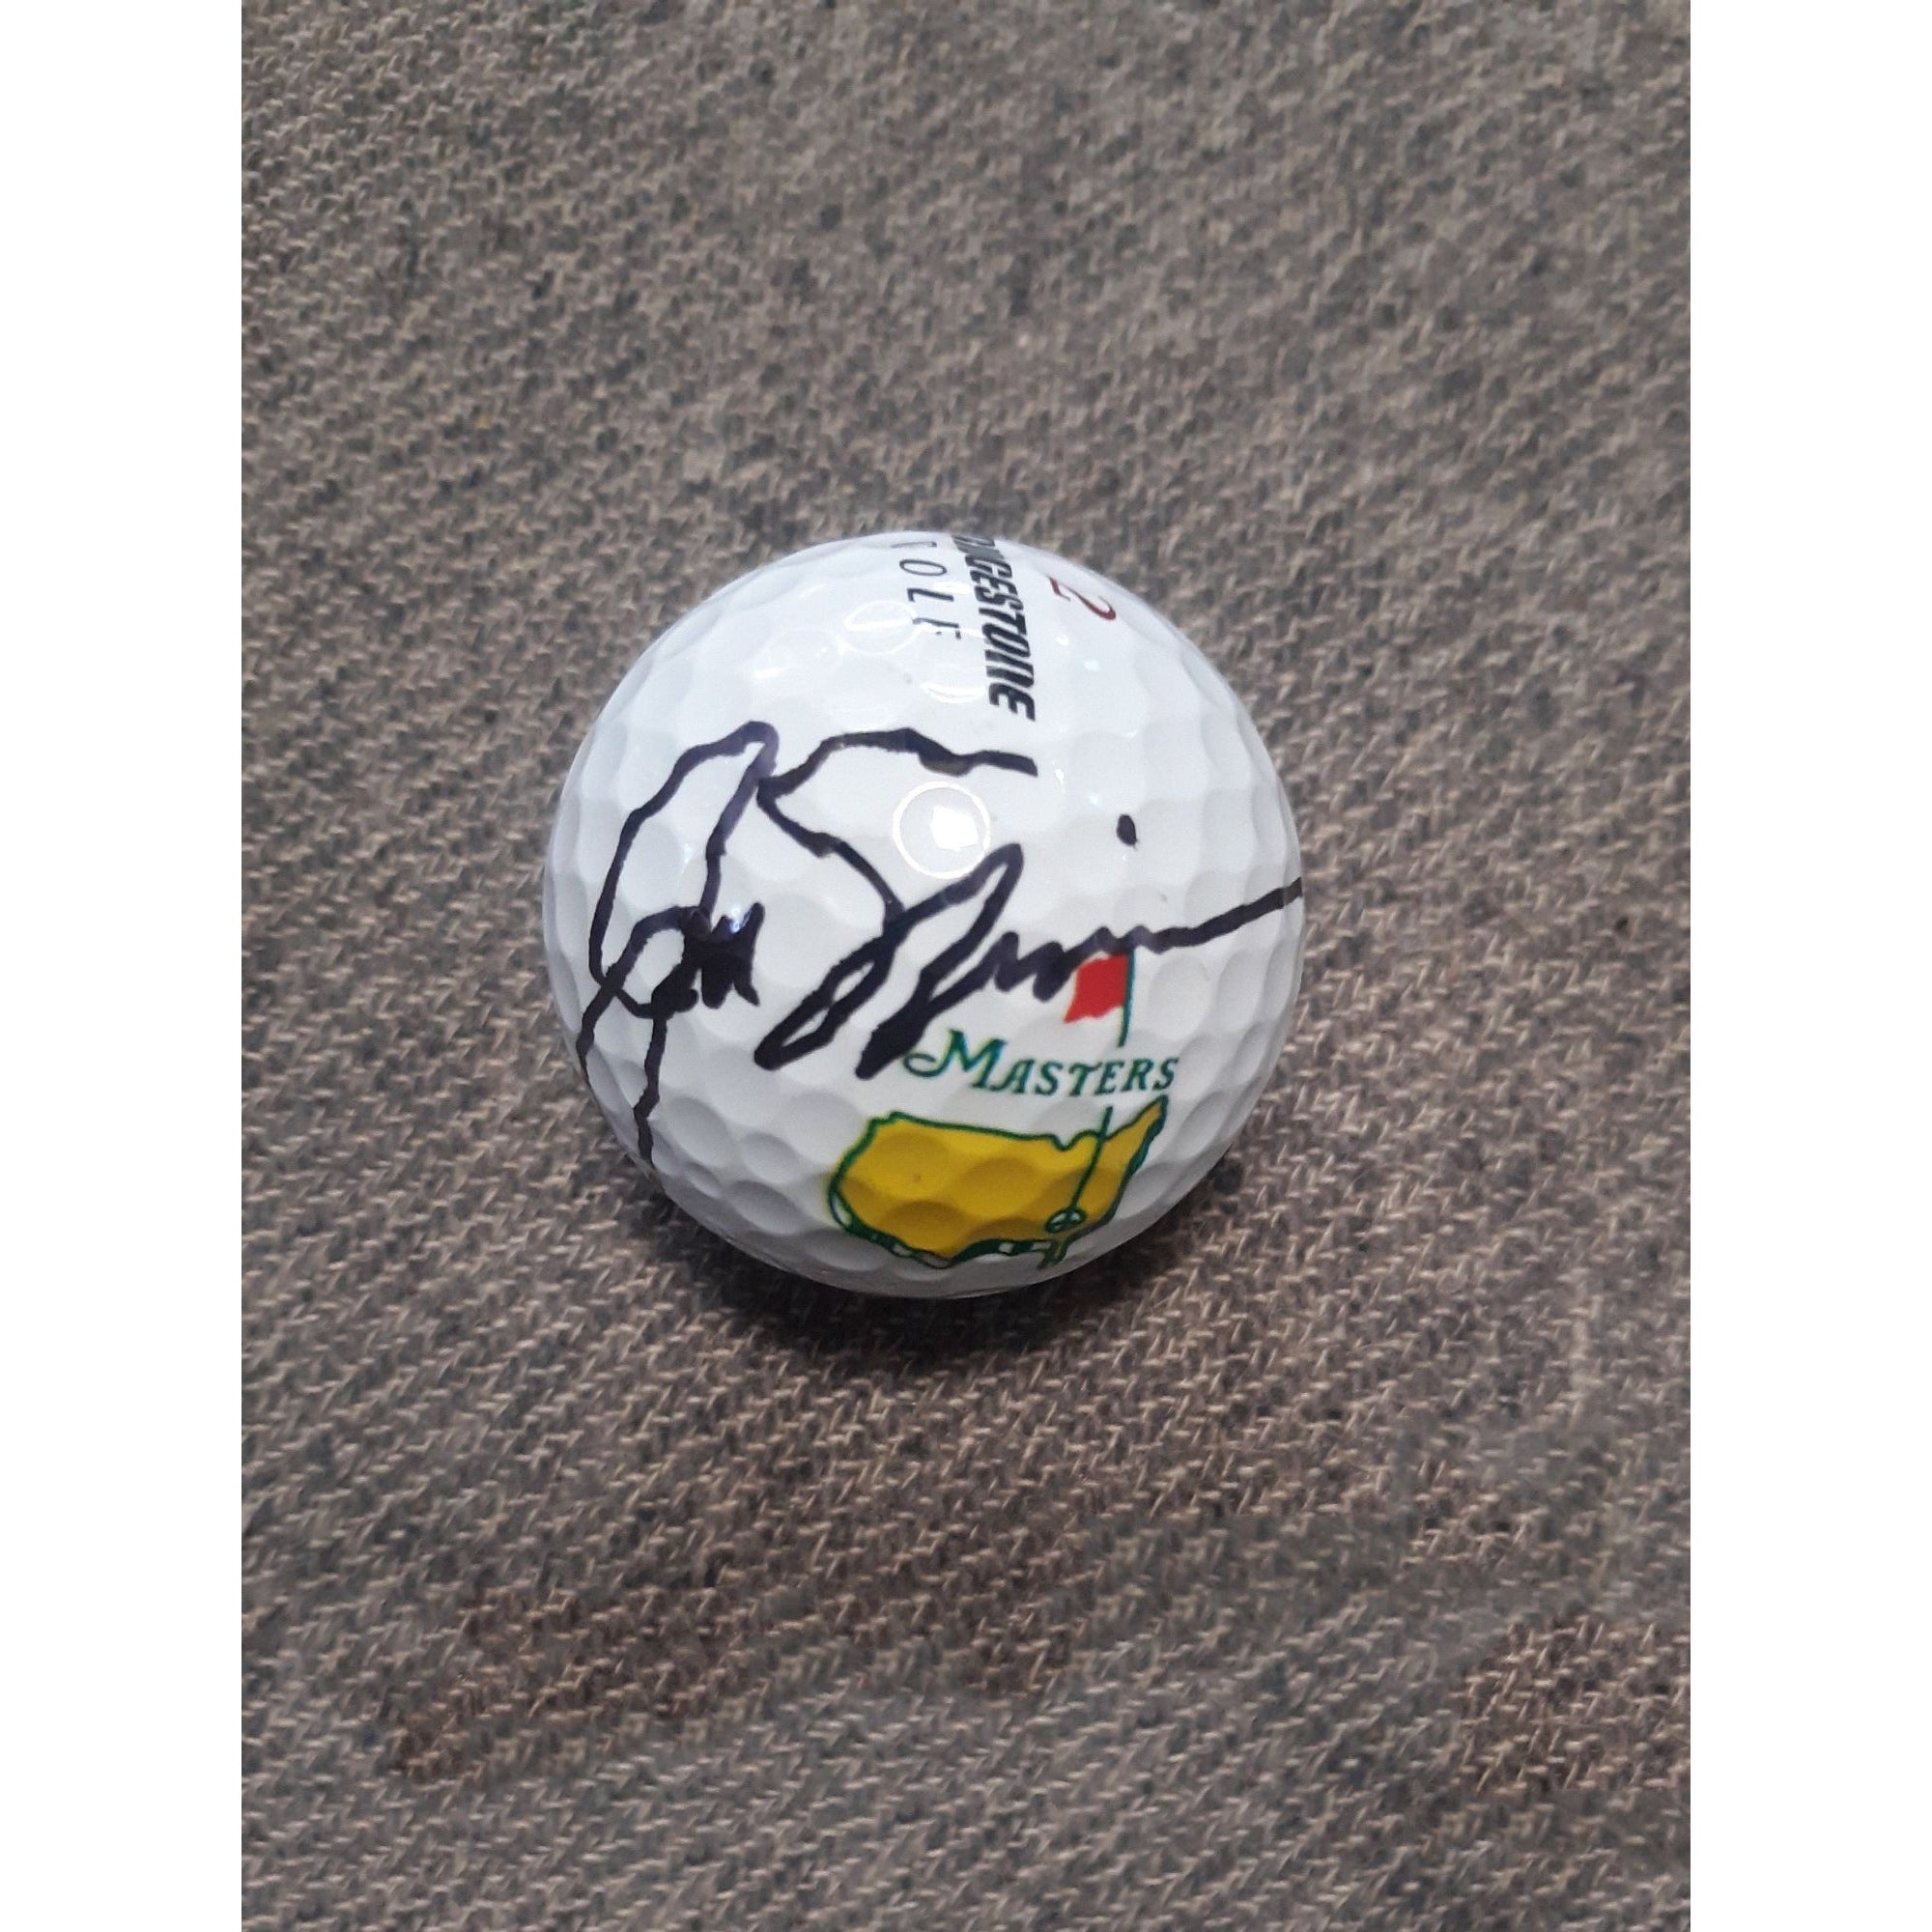 Jack Nicklaus Masters signed golf ball with proof & case